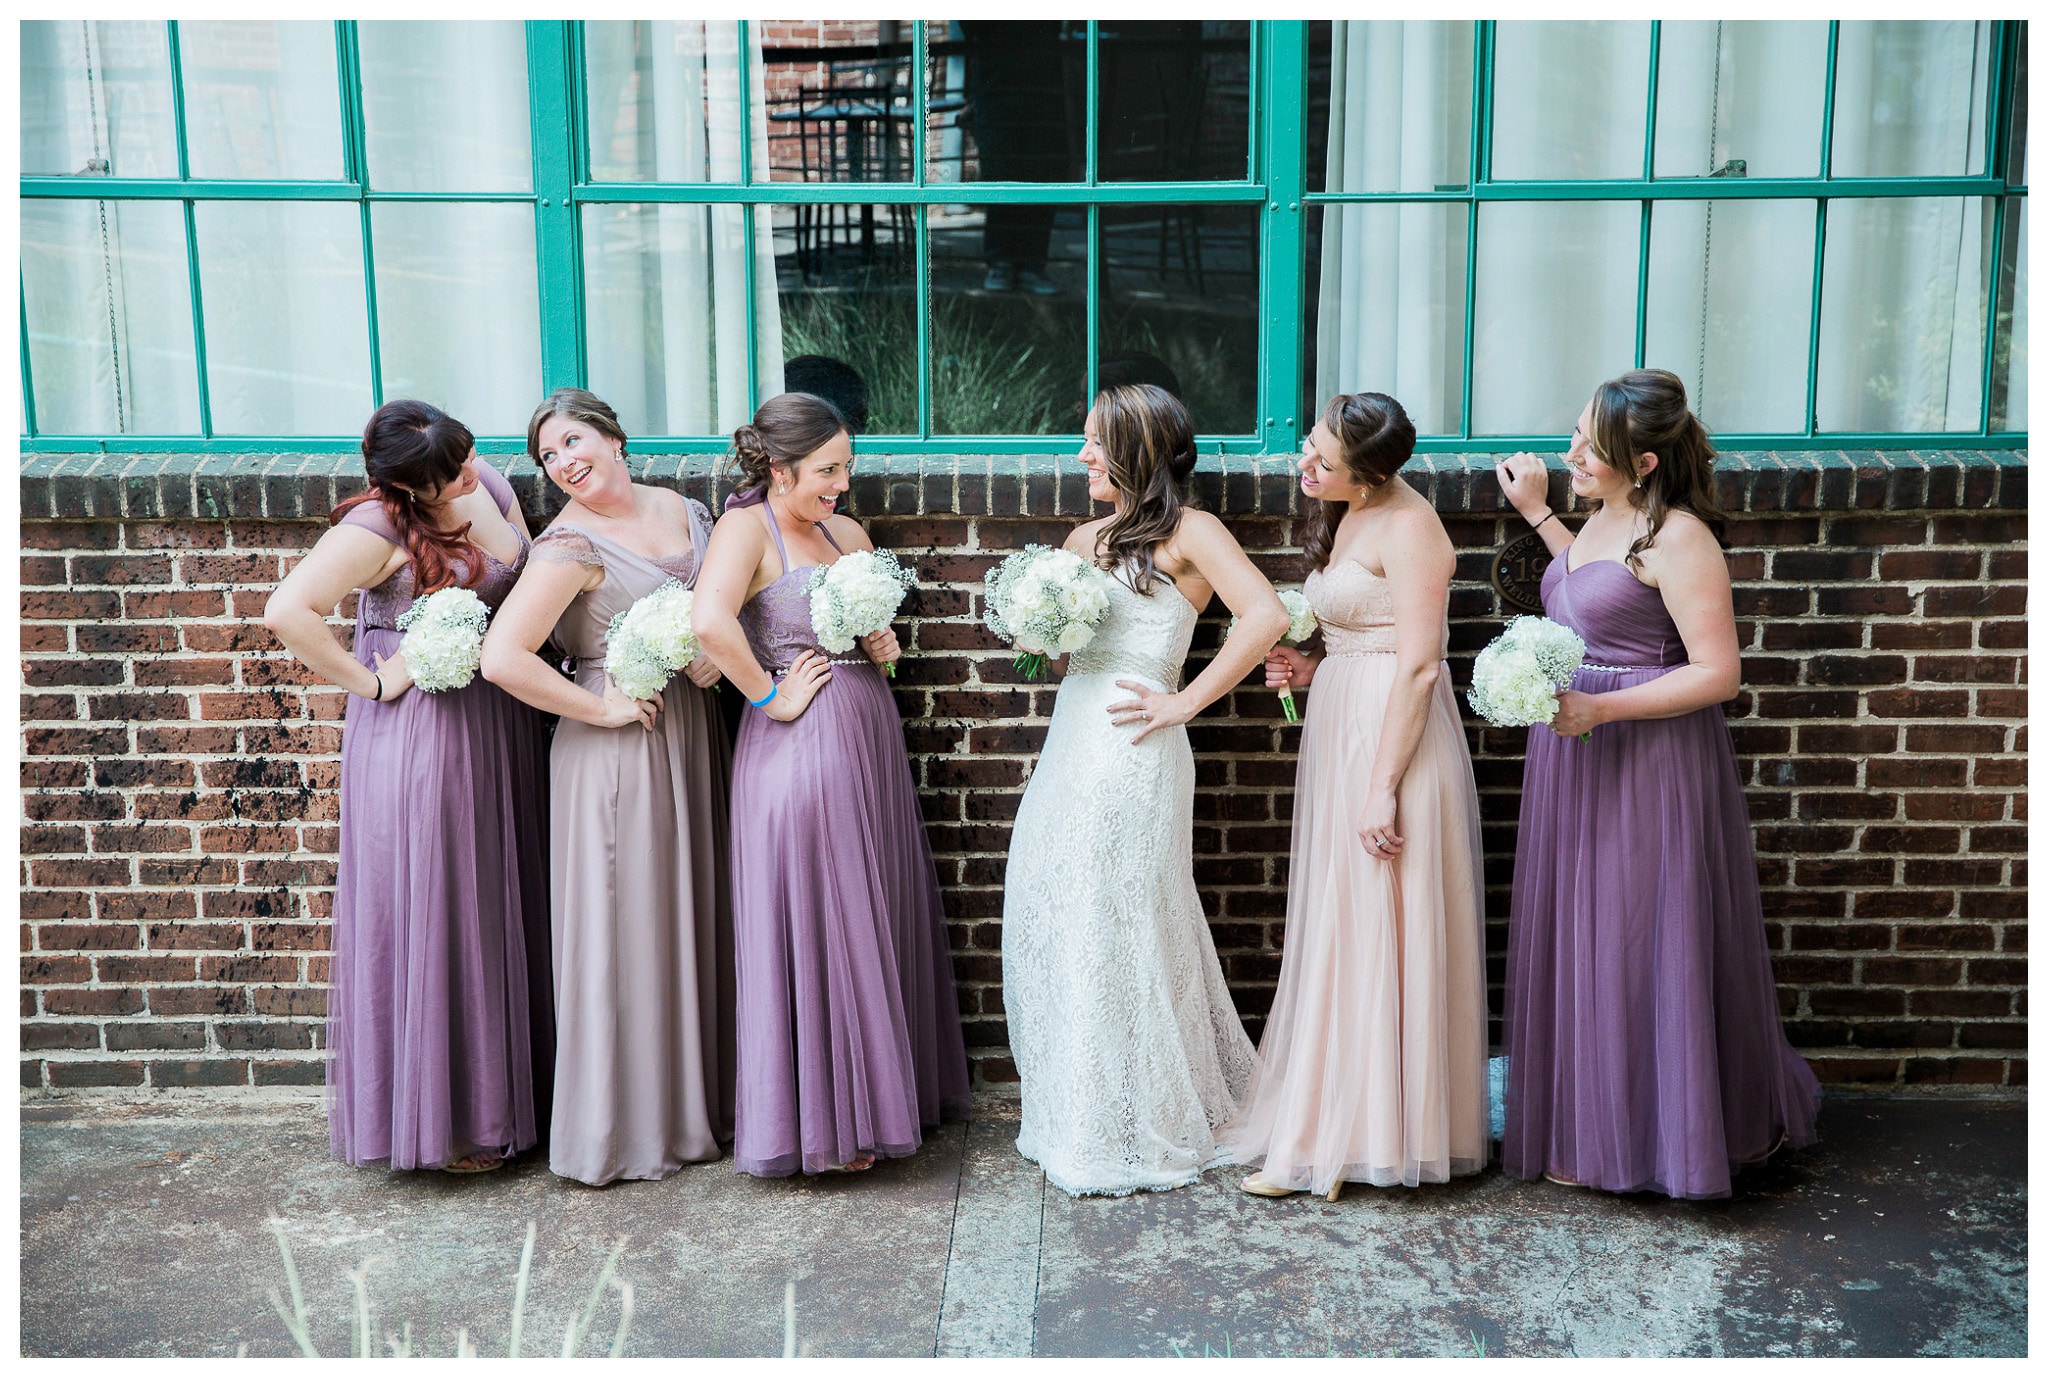 Saucy Ladies, The Bridesmaids fun poses with the bride, Venue and Catering – King plow Event Gallery and Bold American Events Decor and flowers – Stylish Stems Music and Band – Seven Sharp Nine Transportation – Georgia Trolley Photographer One Life Photography